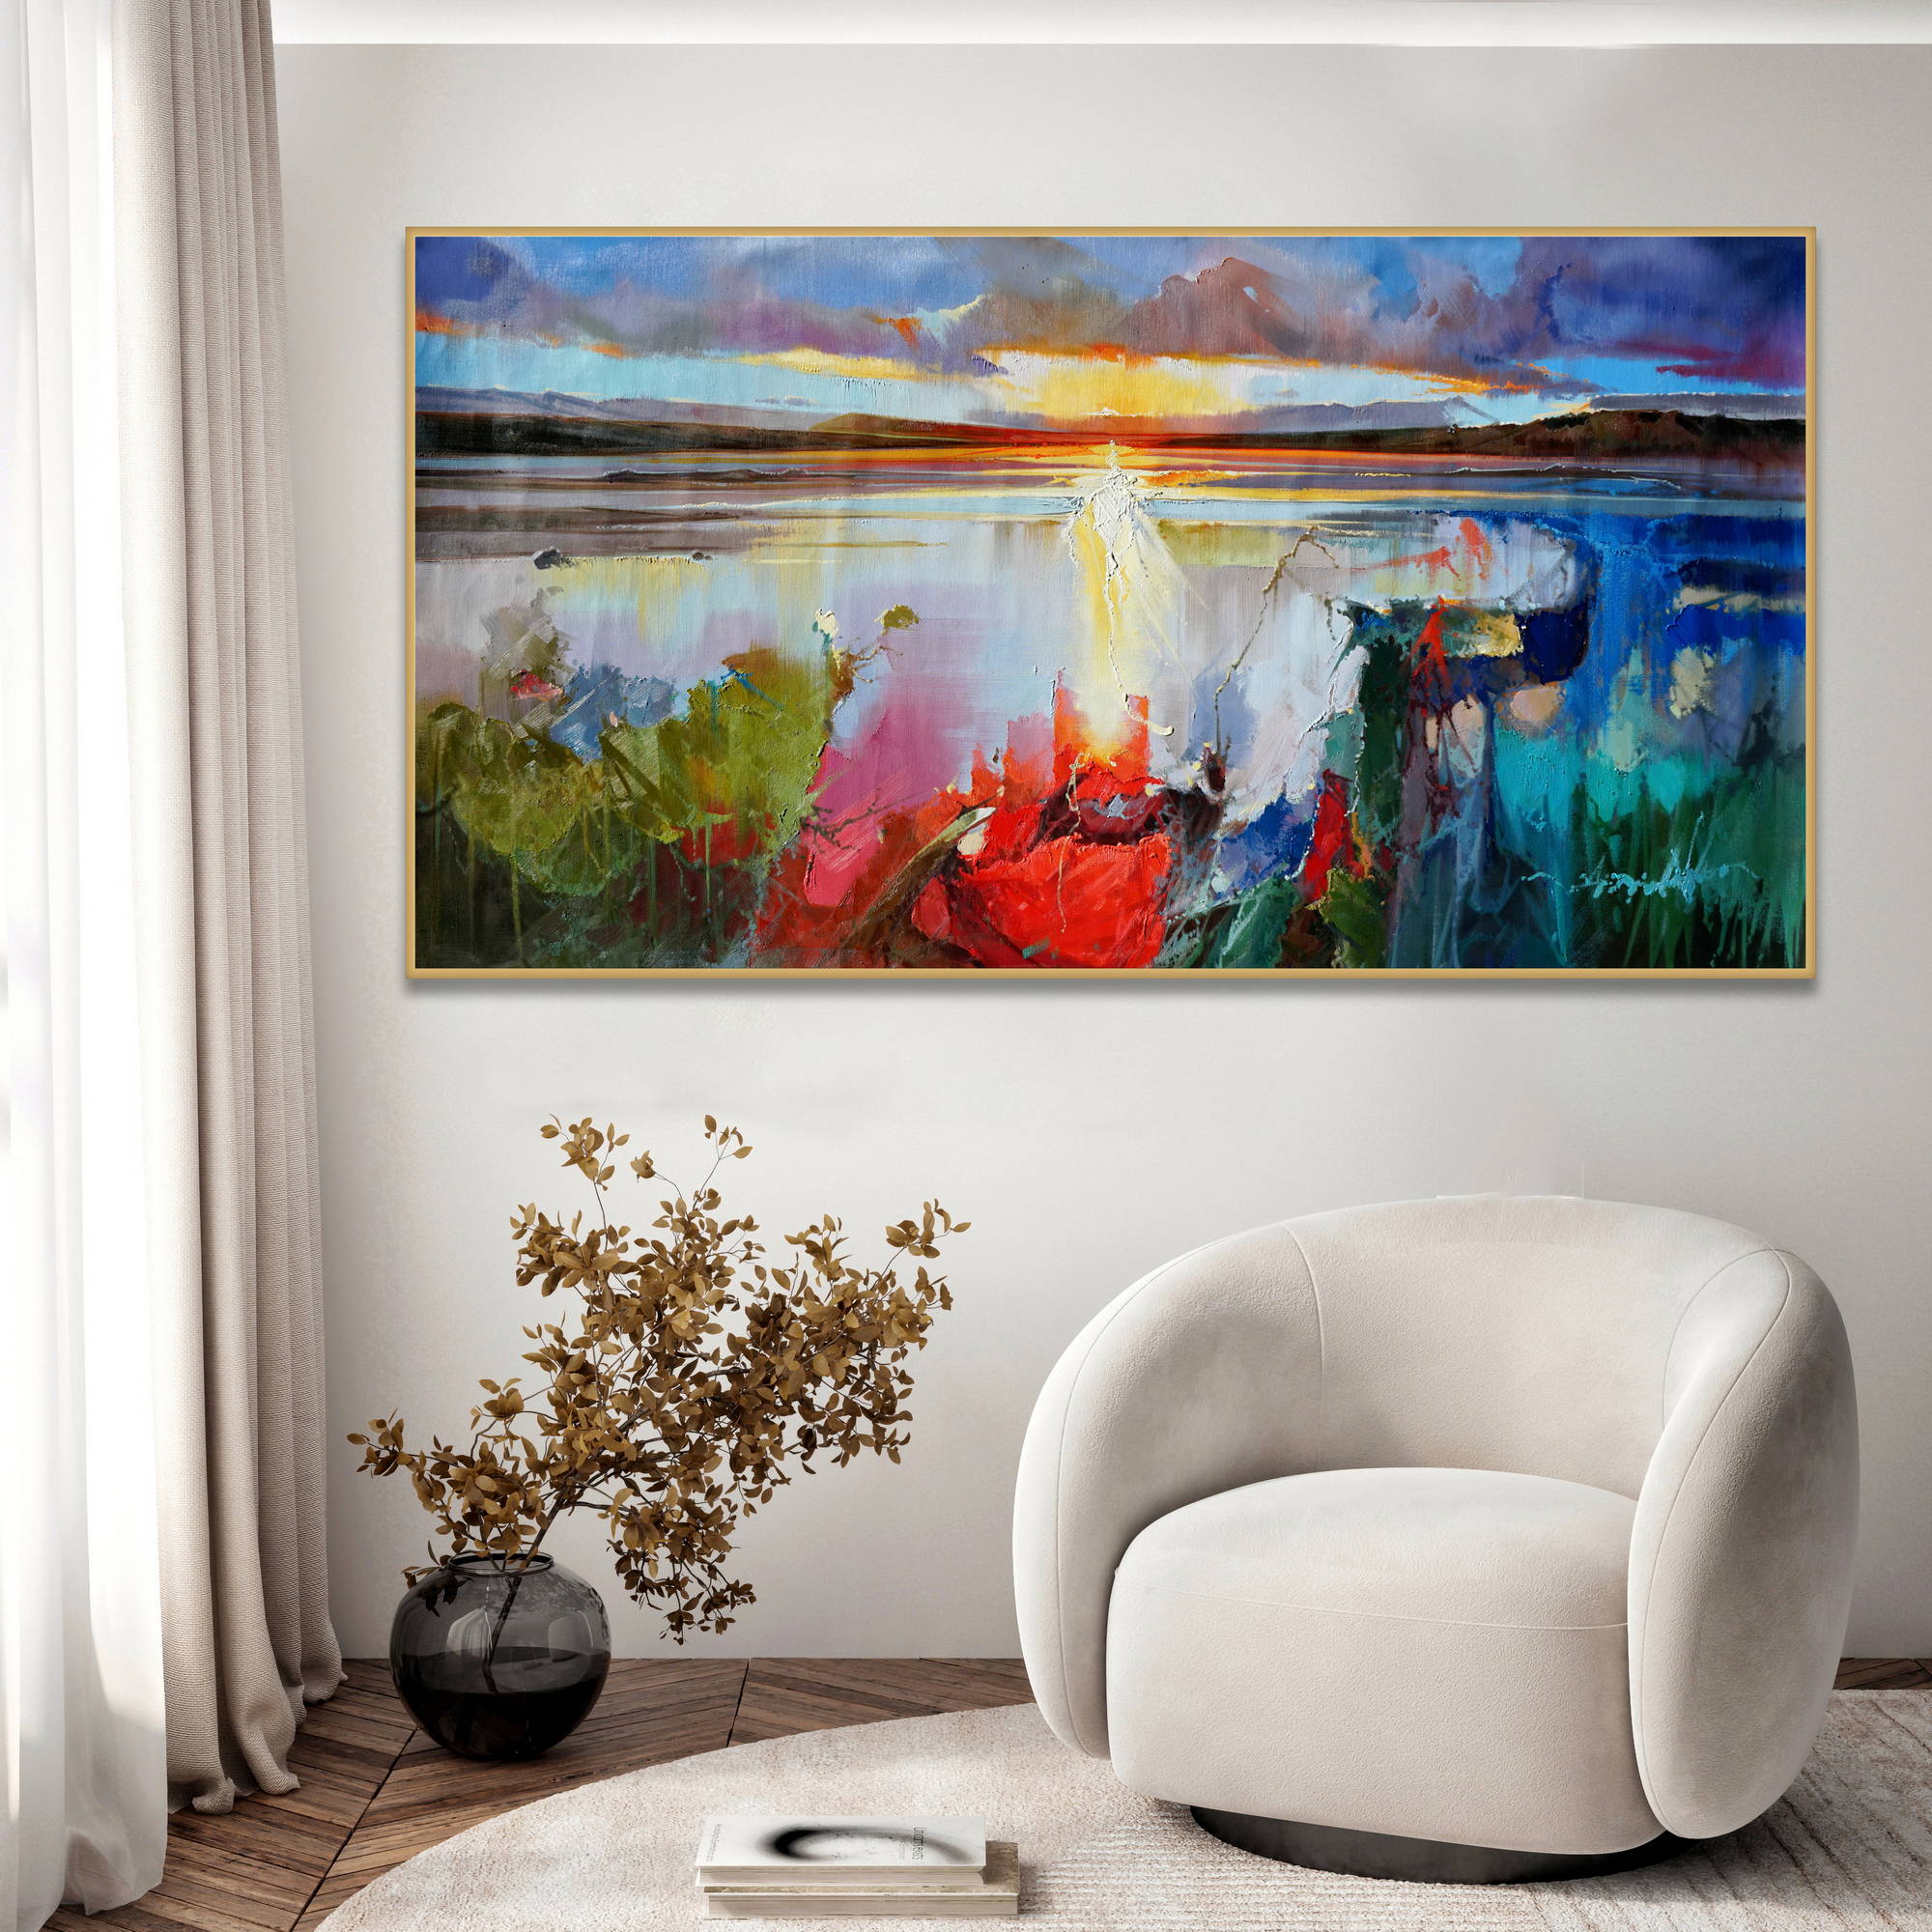 Hand painted Abstract Landscape at sunset 90x180cm